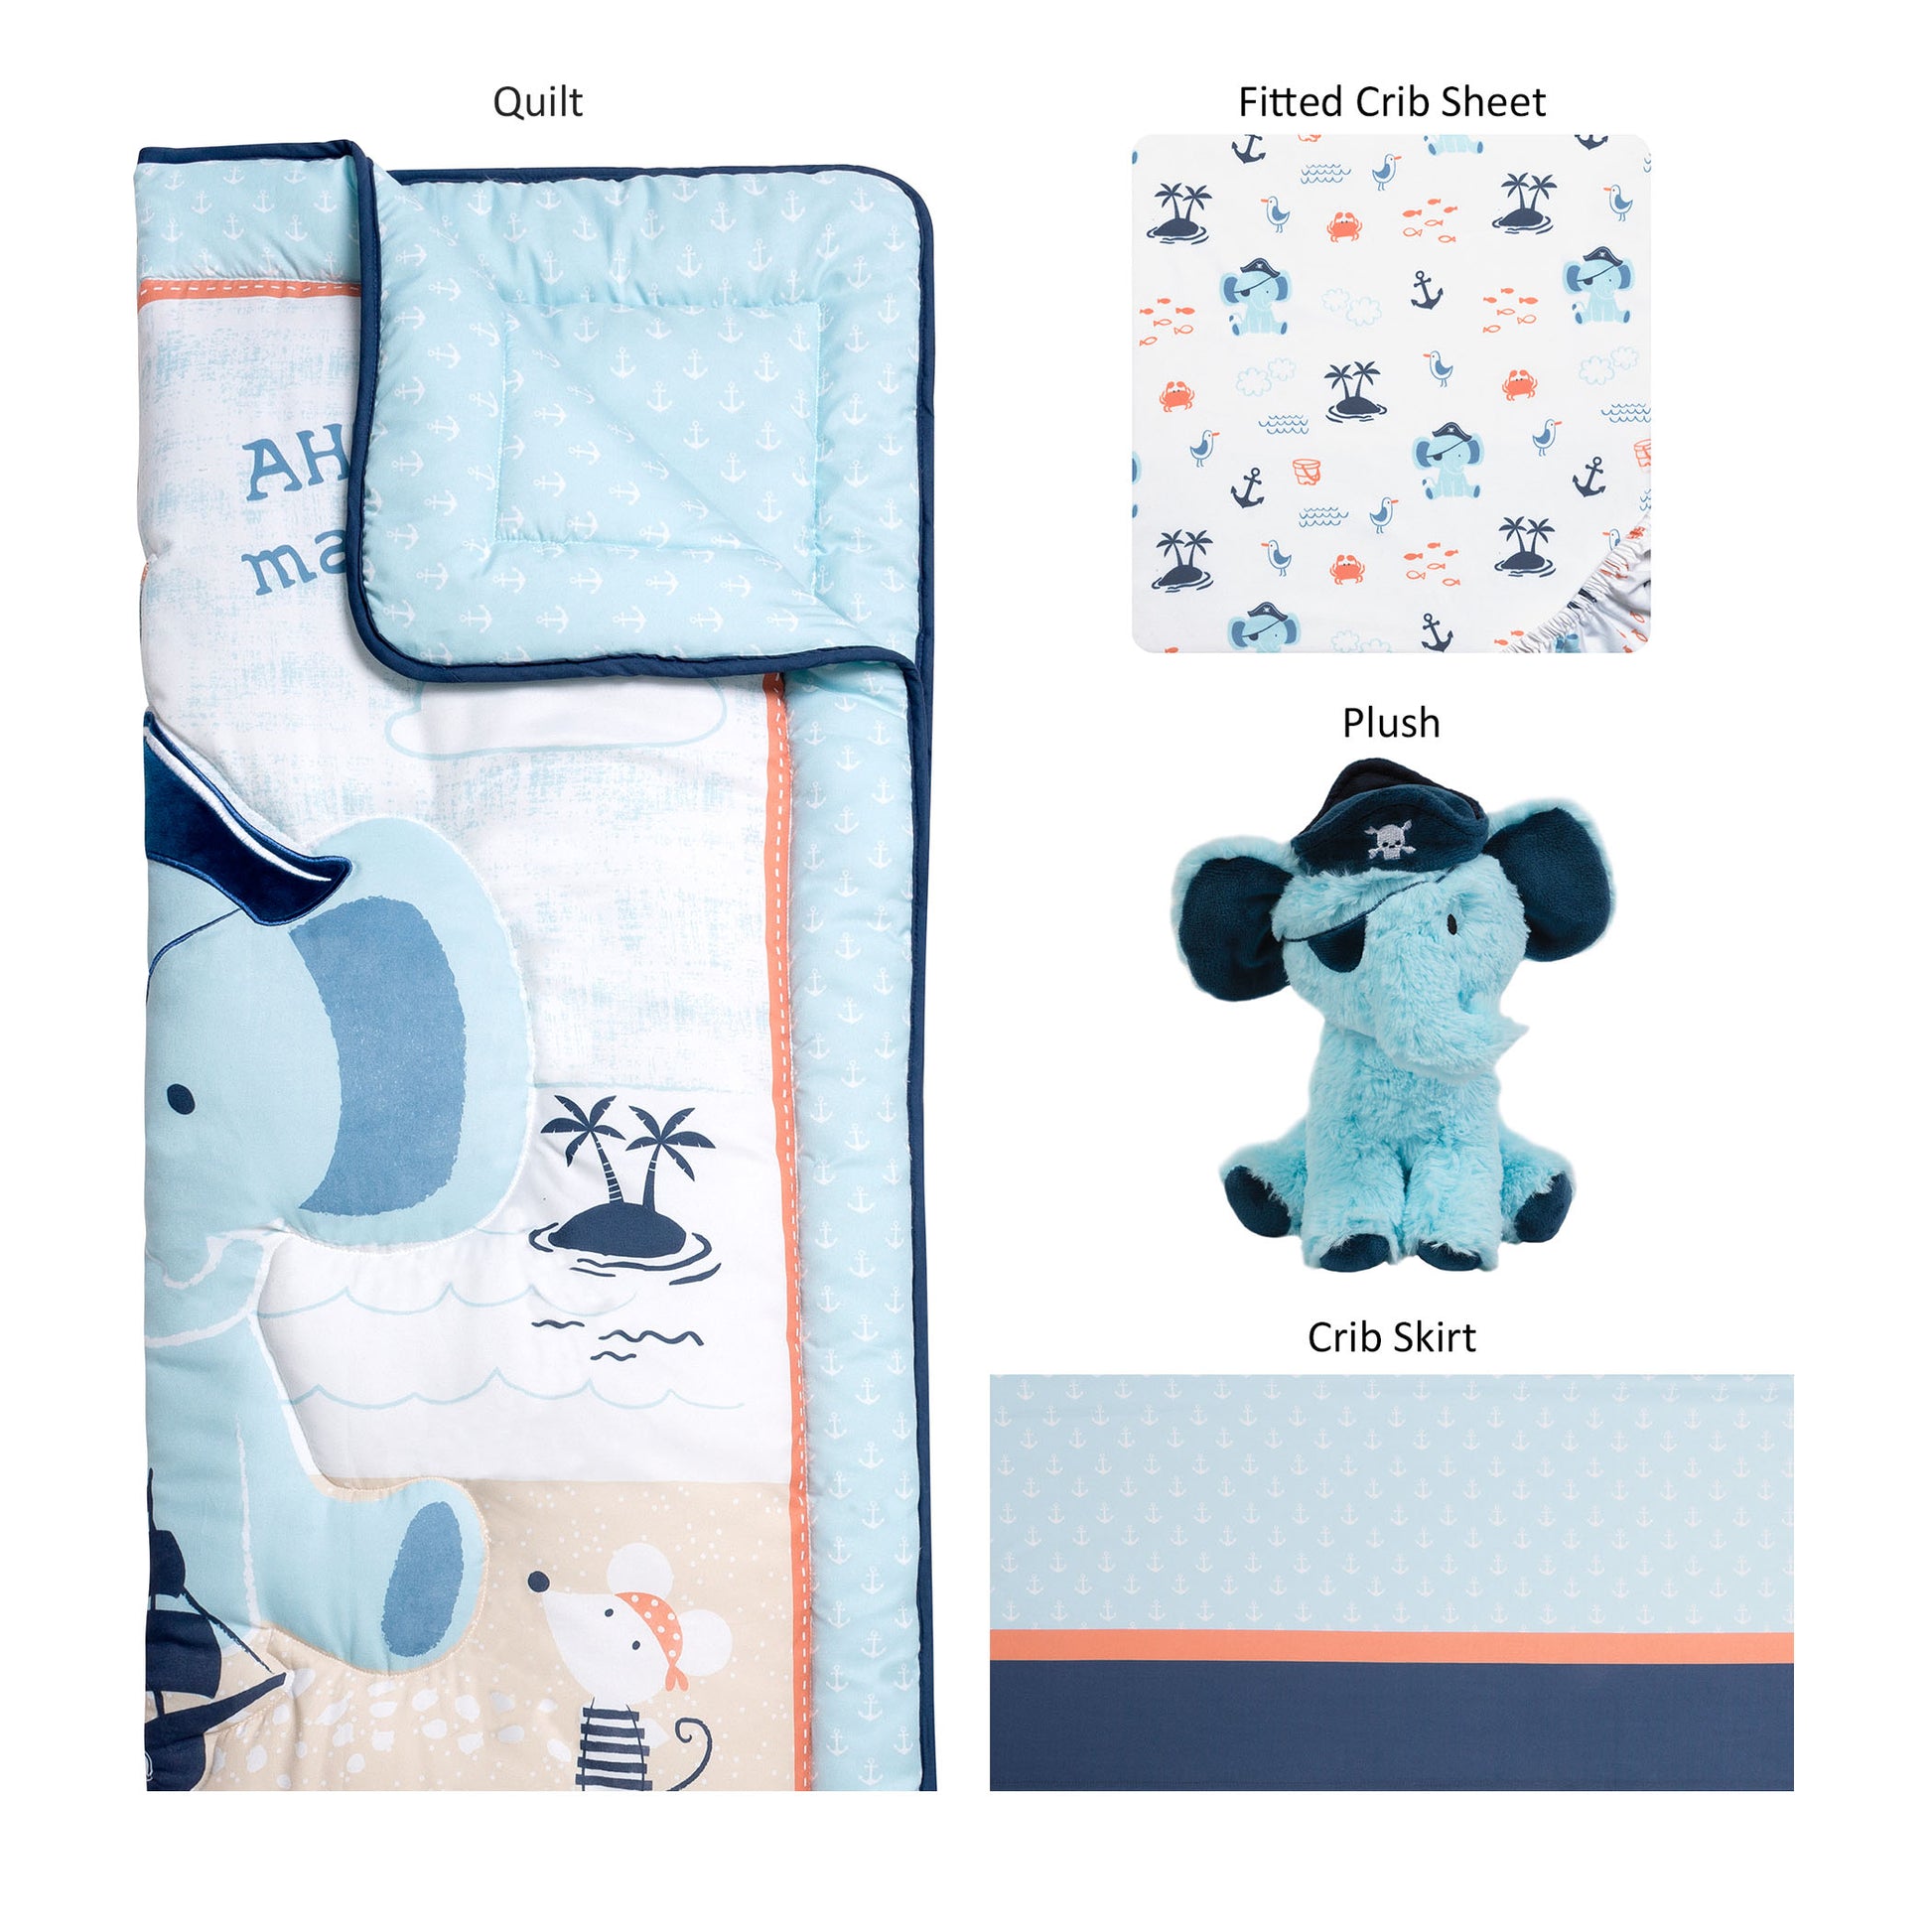 Ahoy Archie 4 Piece Crib Bedding Set by Sammy & Lou Pieces Laid Out, Features Crib Quilt, Crib Sheet, Crib Skirt, and Plush Toy